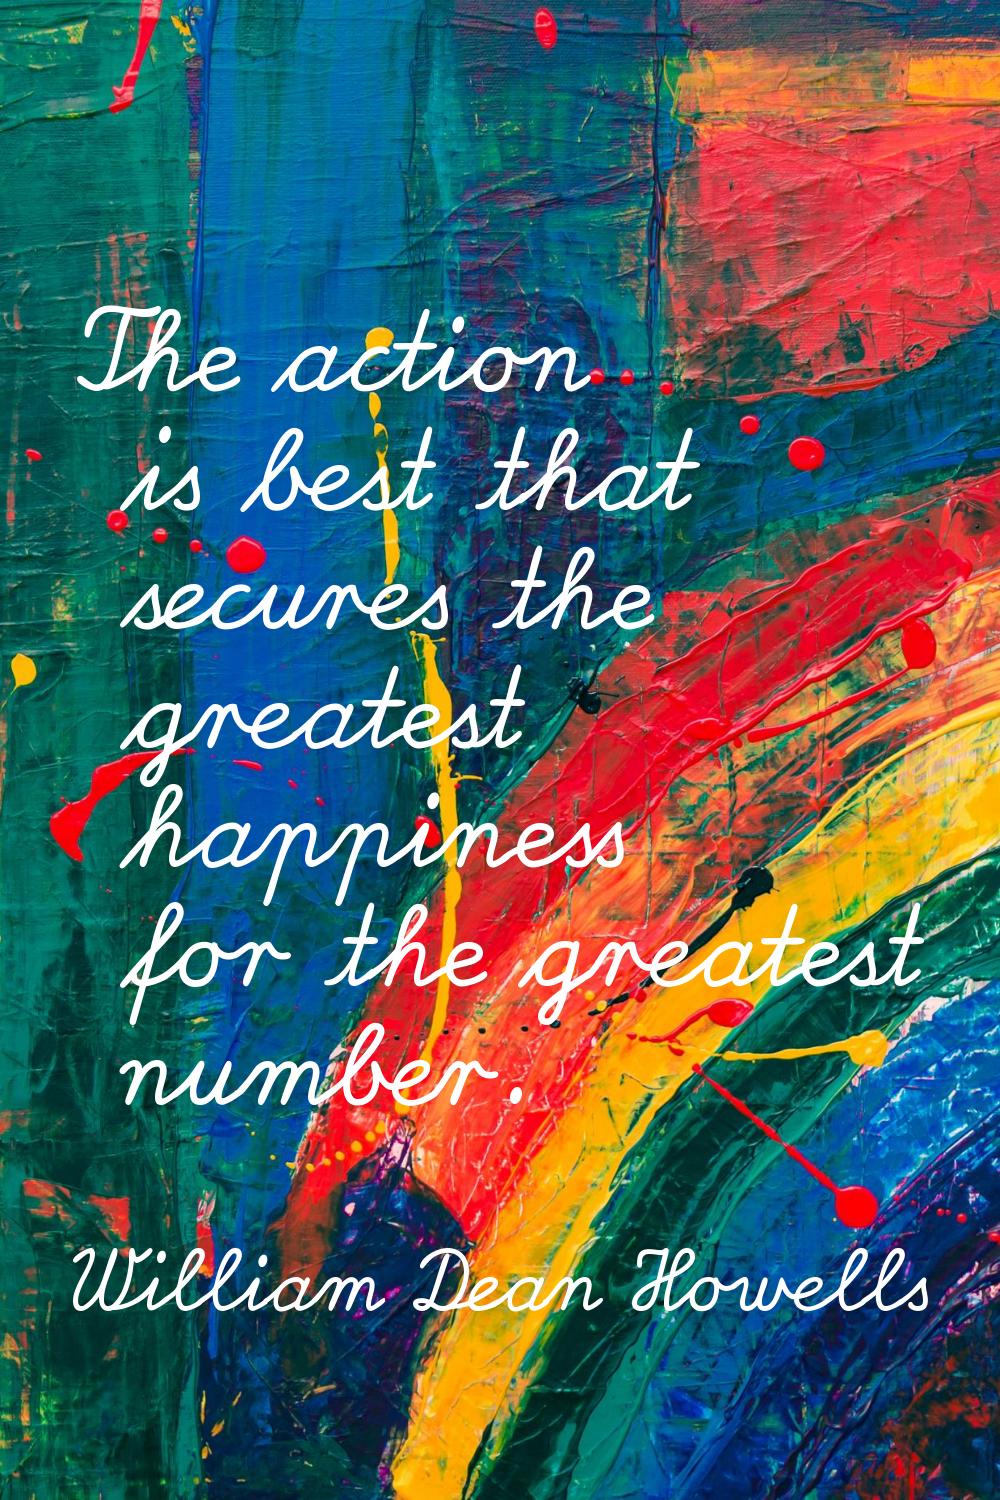 The action is best that secures the greatest happiness for the greatest number.